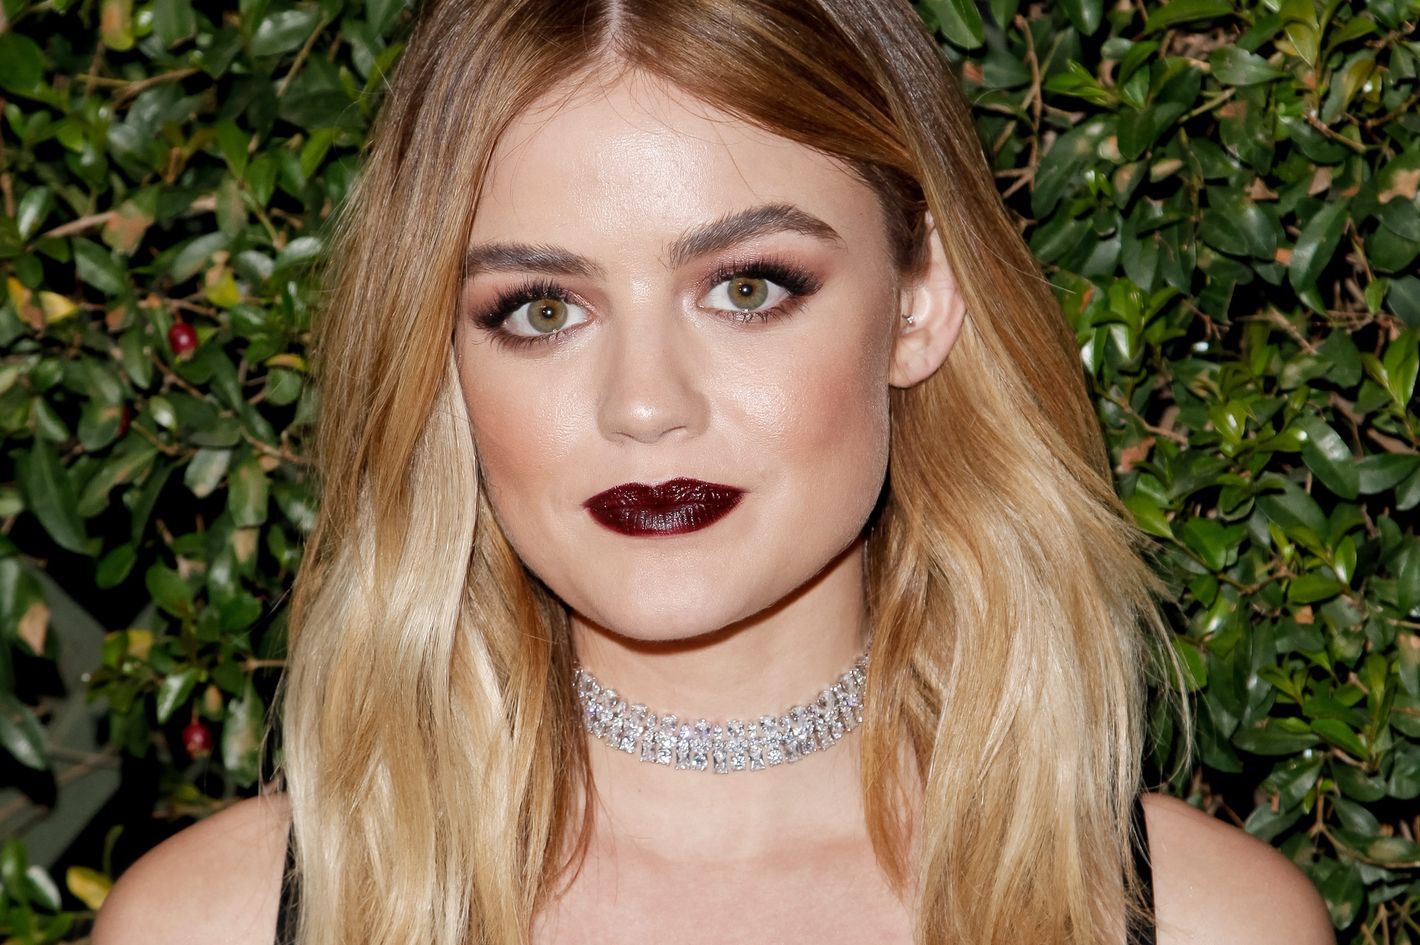 Lucy hale leaked photos